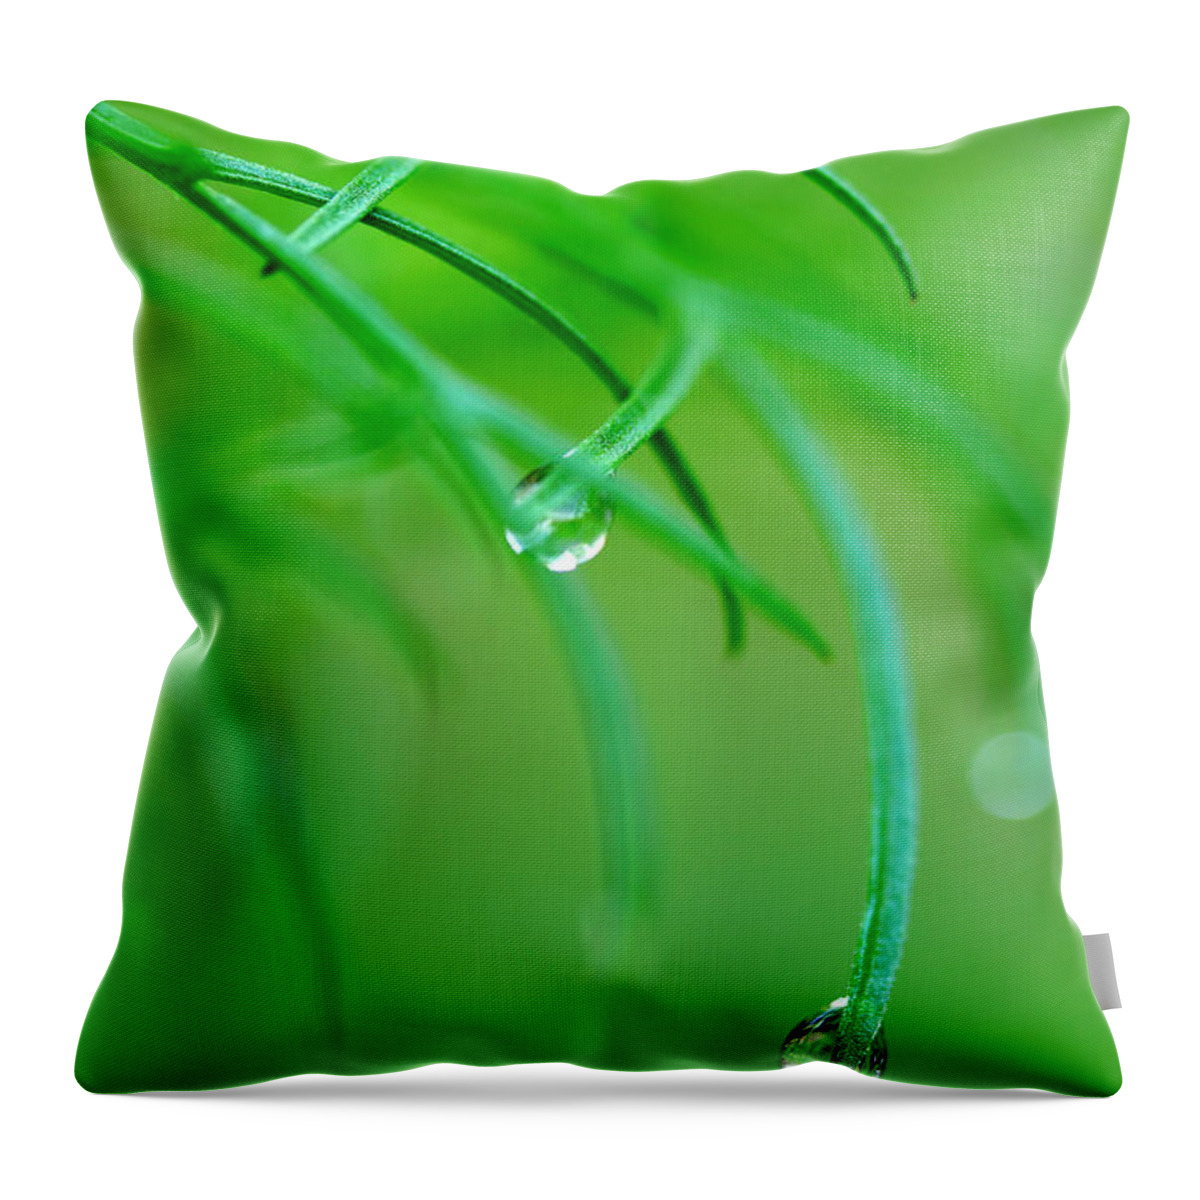 Dew Drops Throw Pillow featuring the photograph Garden Gifts by Michael Eingle